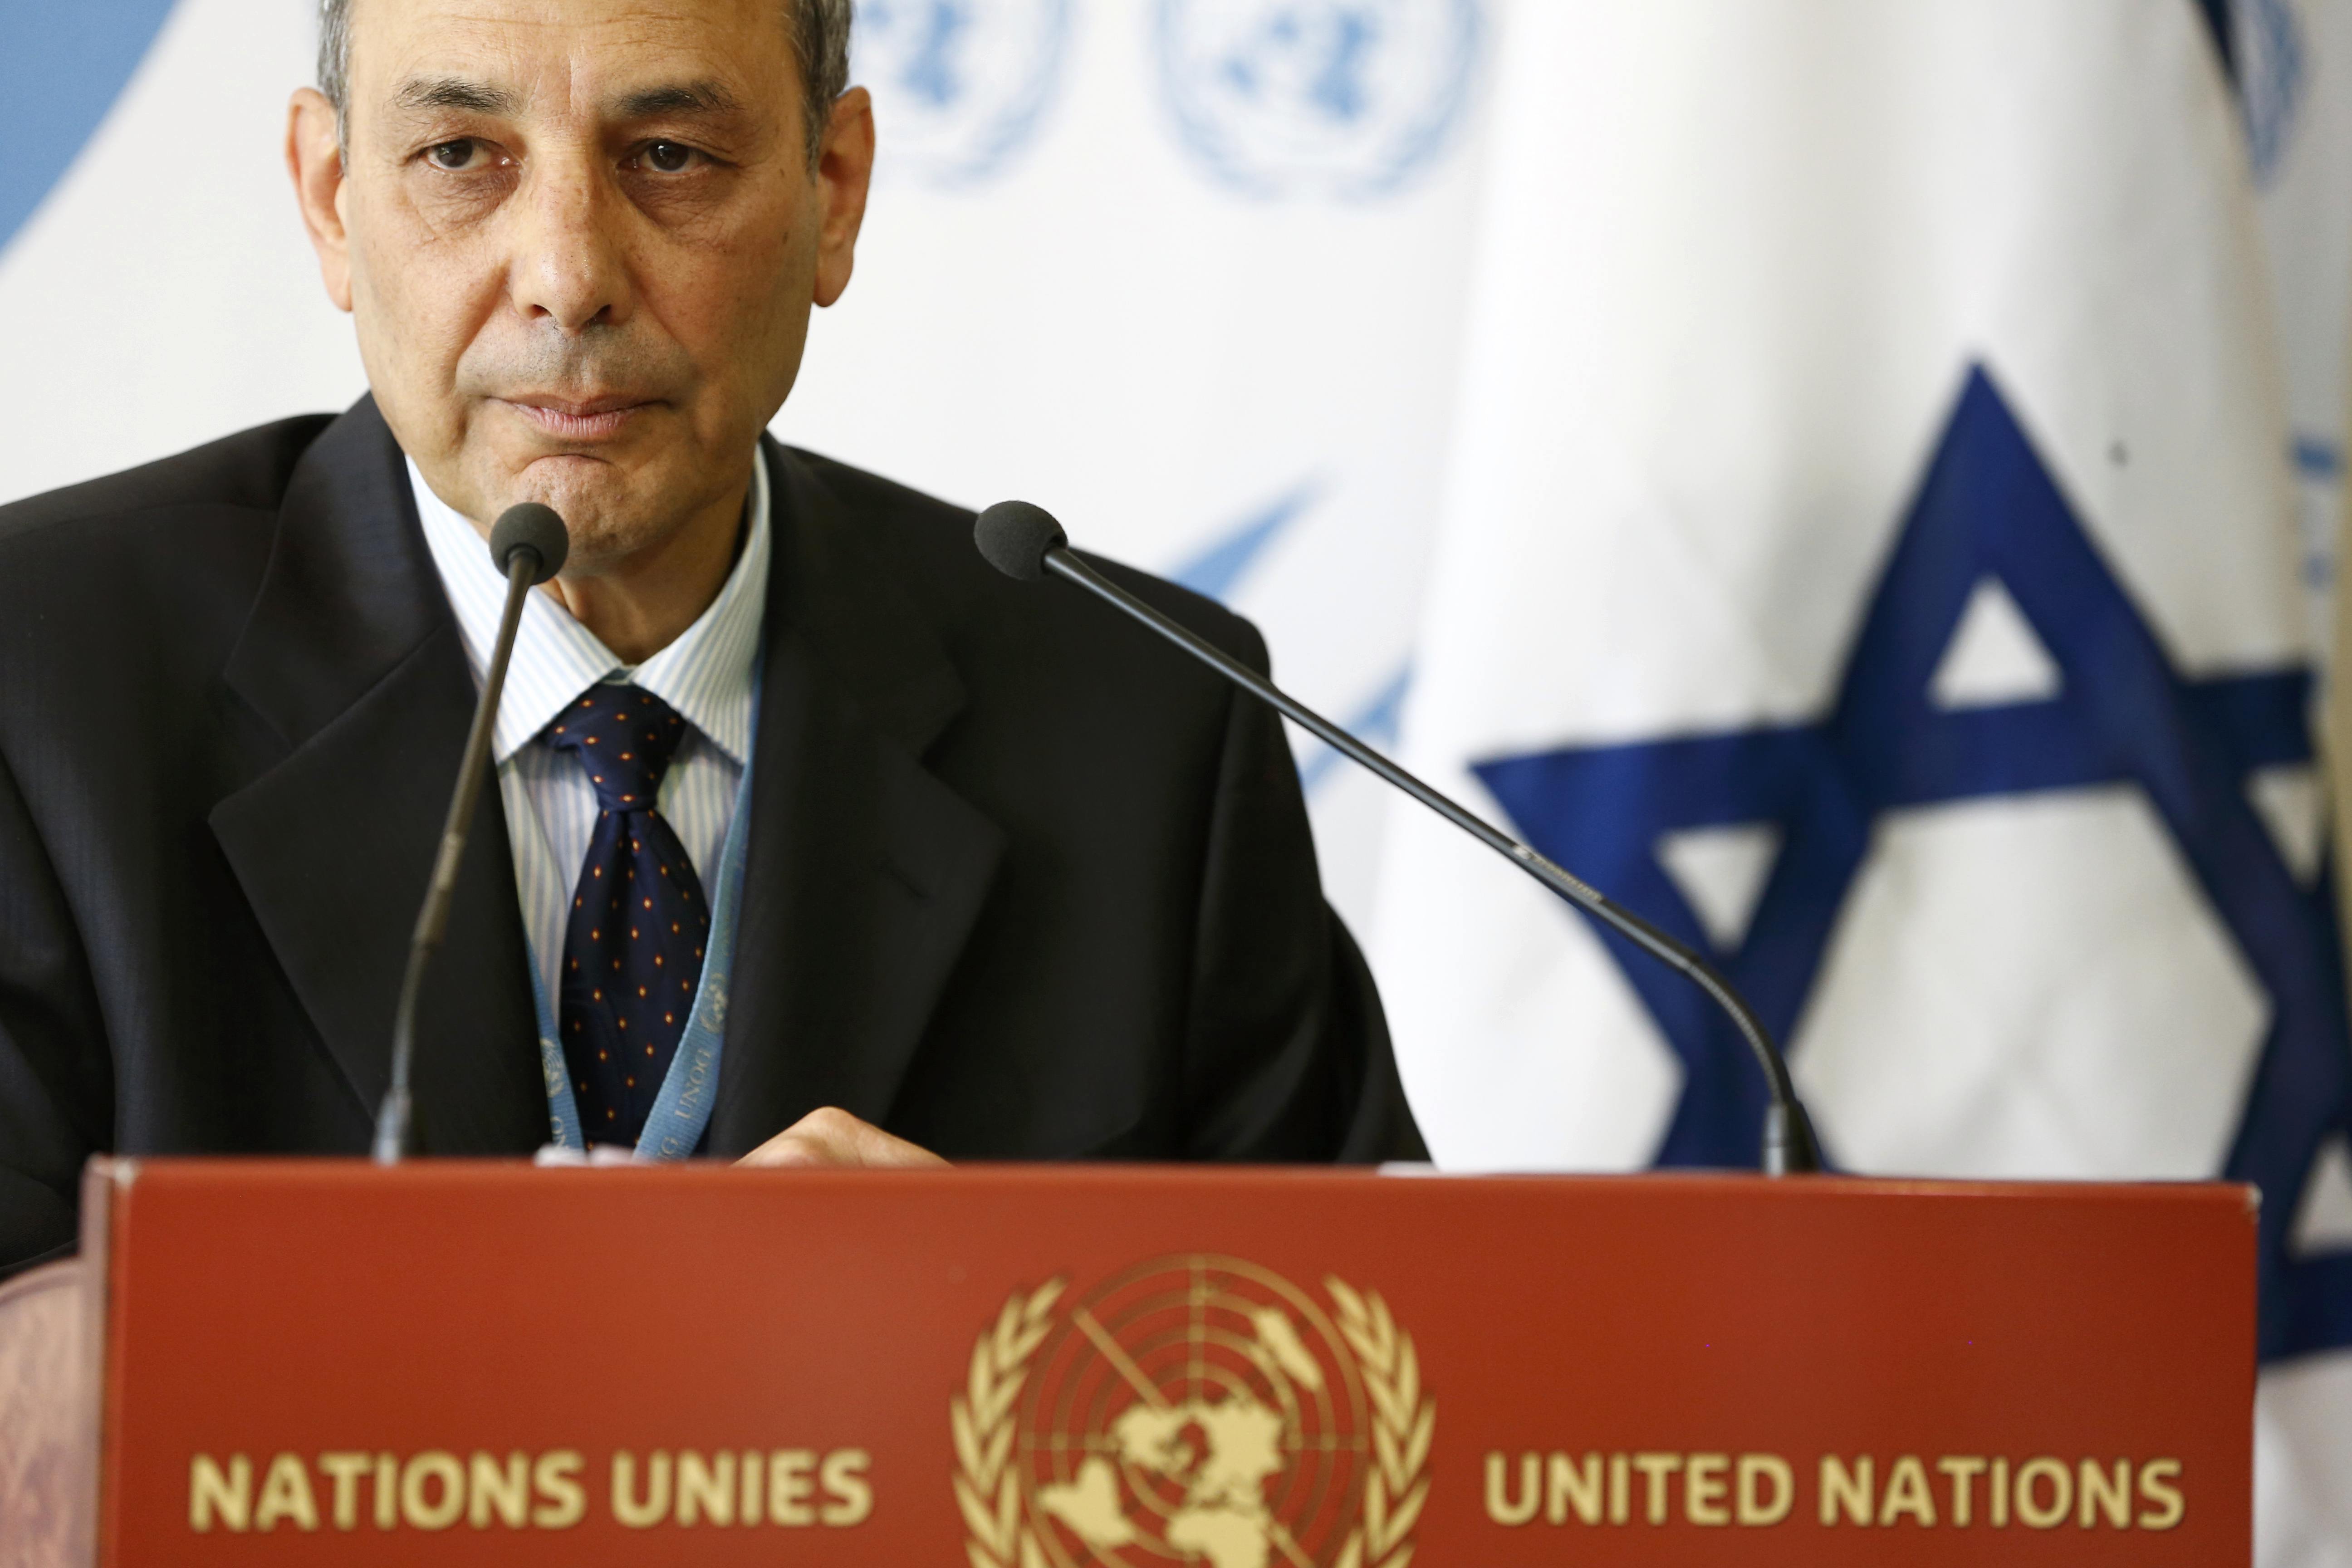 Israeli ambassador Eviatar Manor speaks to the press at a stake-out after presentation of report by the Independent Commission of Inquiry on the 2014 Gaza Conflict at the United Nations headquarters in Geneva, Switzerland, June 29, 2015. REUTERS/Pierre Albouy